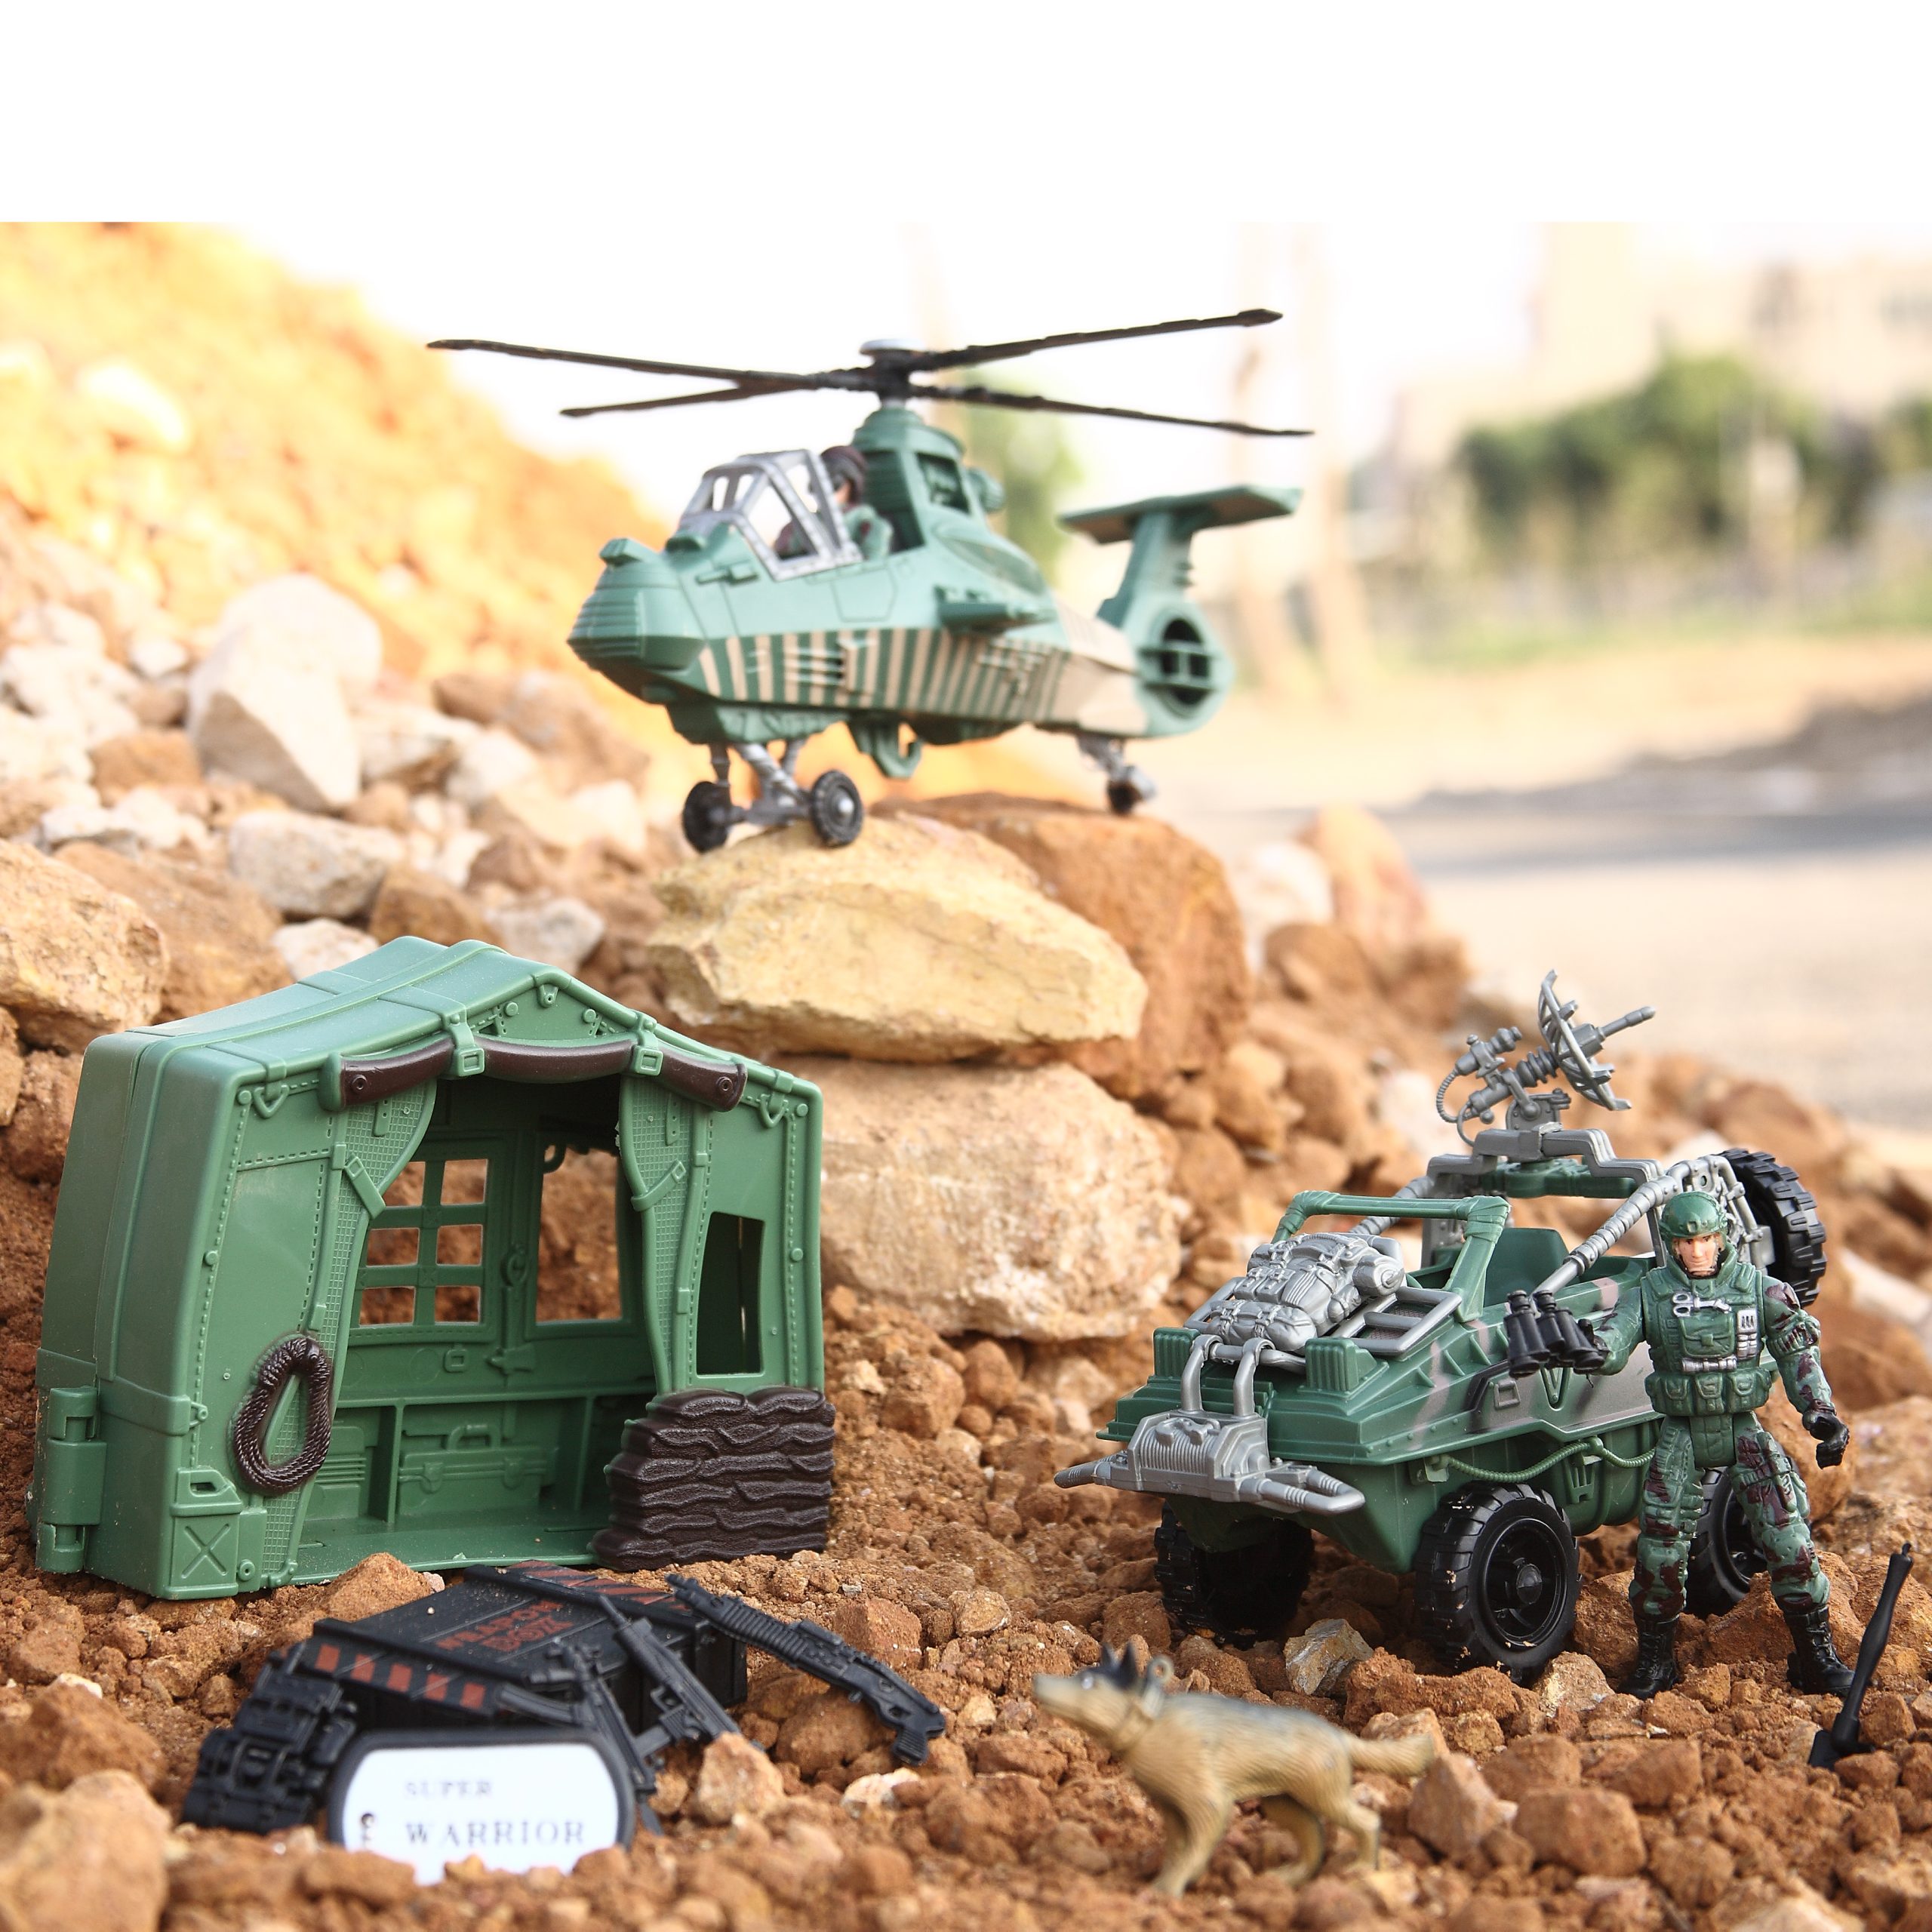 You are currently viewing 2022 Top 3 Highest Rated Military Toys Themes